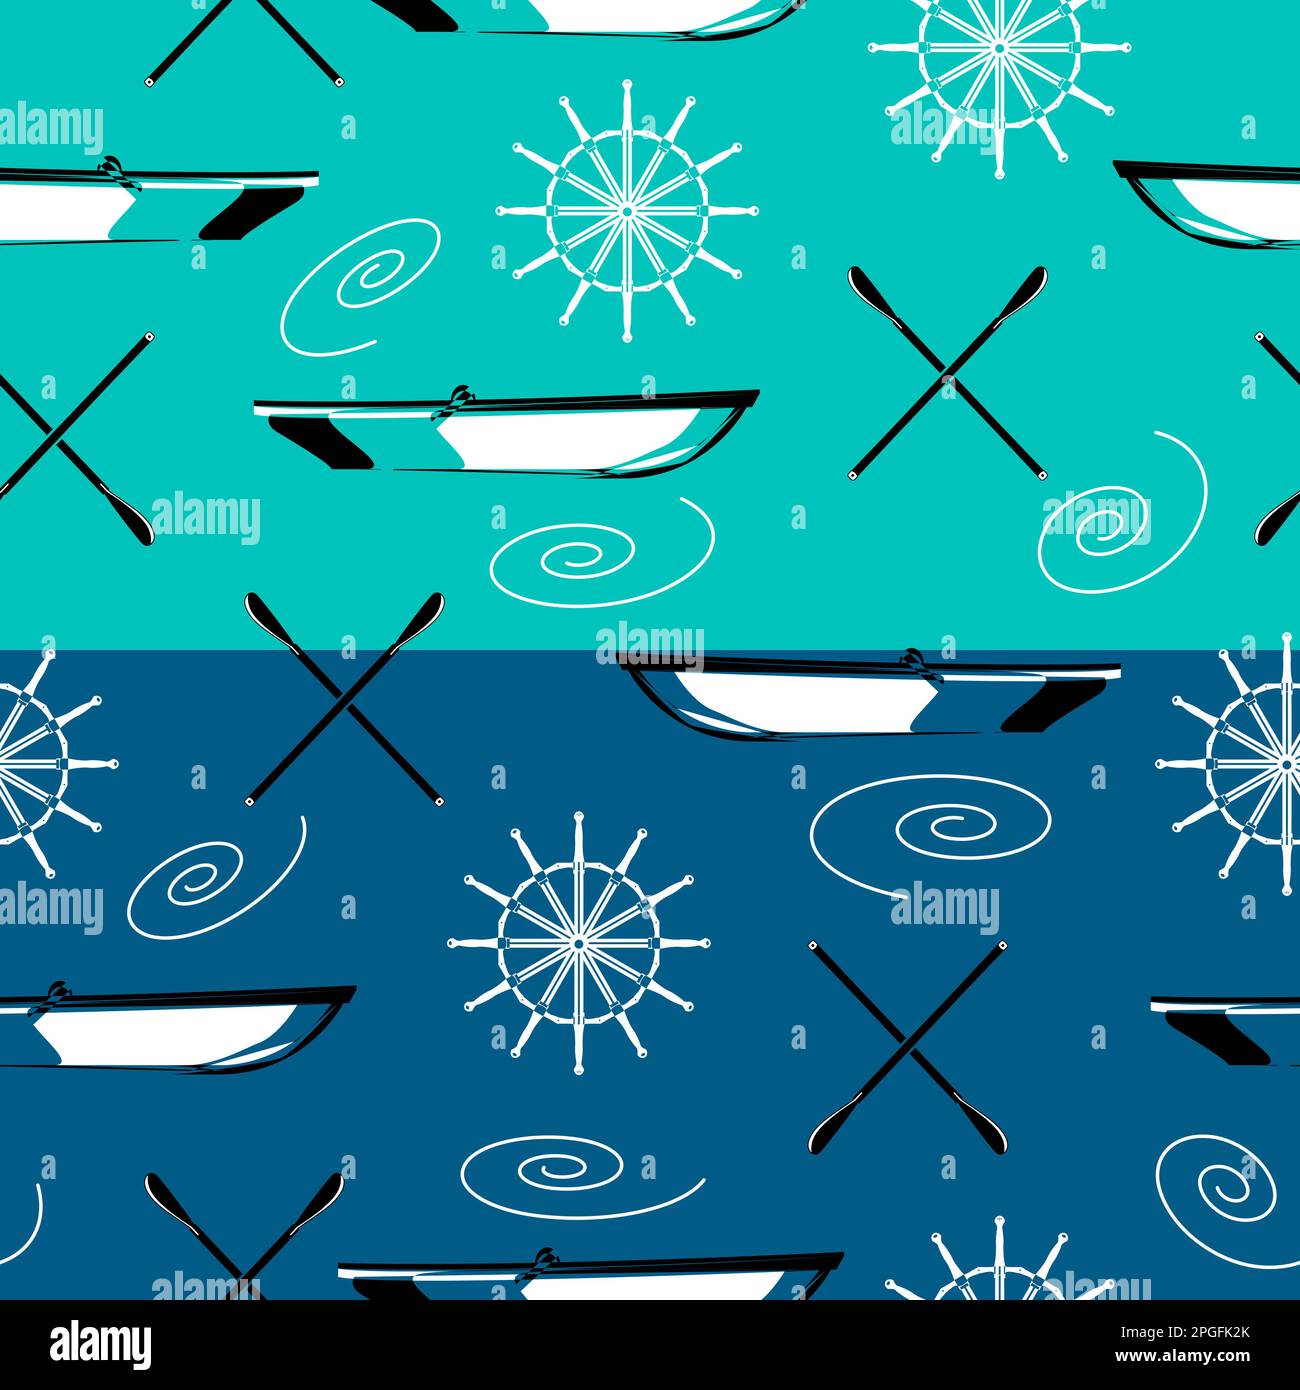 Boat, oars and steerling wheel in outline style. Seamless pattern. Sea texture. Printable design. Wallpaper element. Random square pattern. Stock Vector